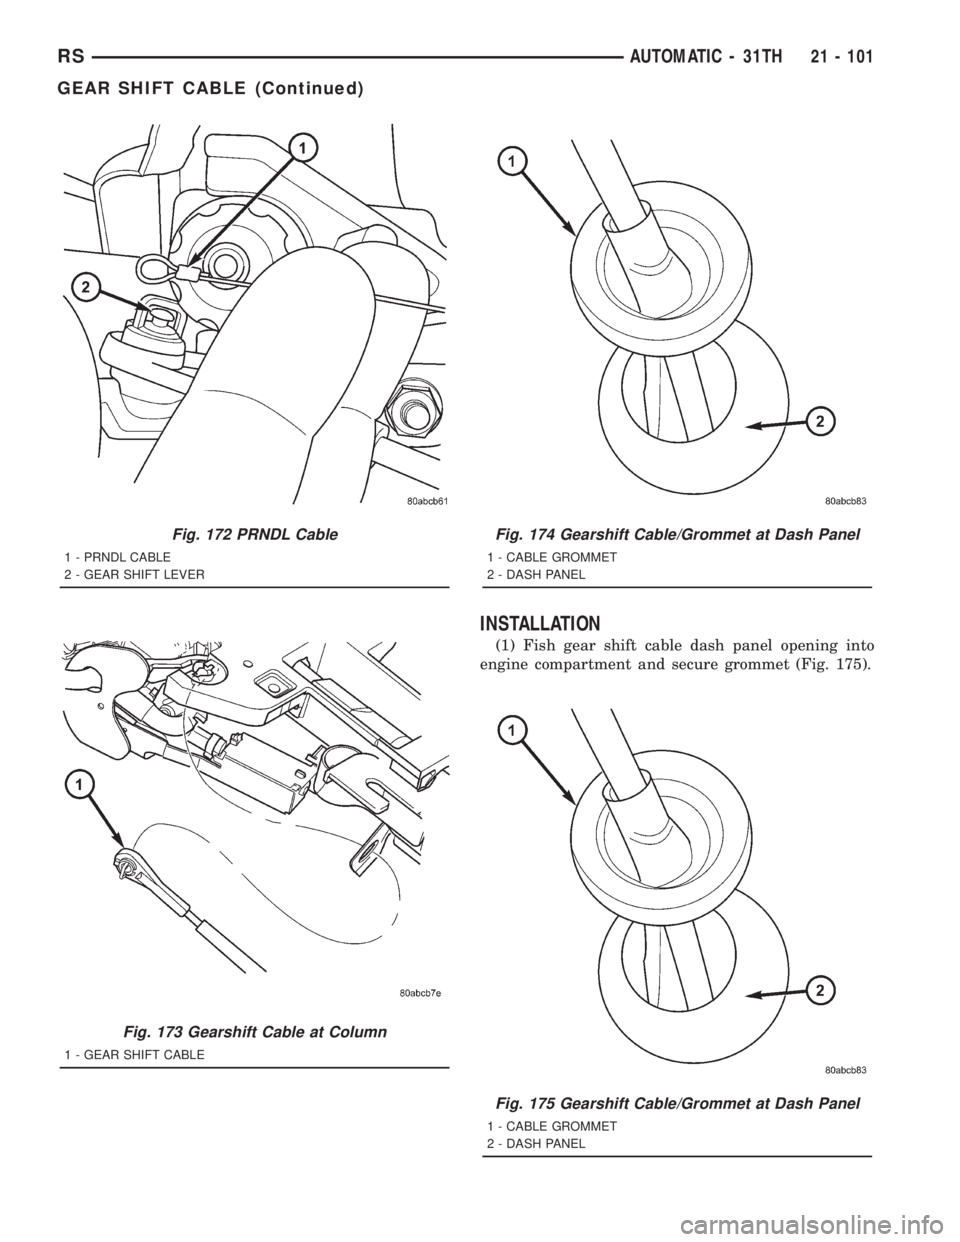 CHRYSLER VOYAGER 2001  Service Manual INSTALLATION
(1) Fish gear shift cable dash panel opening into
engine compartment and secure grommet (Fig. 175).
Fig. 172 PRNDL Cable
1 - PRNDL CABLE
2 - GEAR SHIFT LEVER
Fig. 173 Gearshift Cable at C